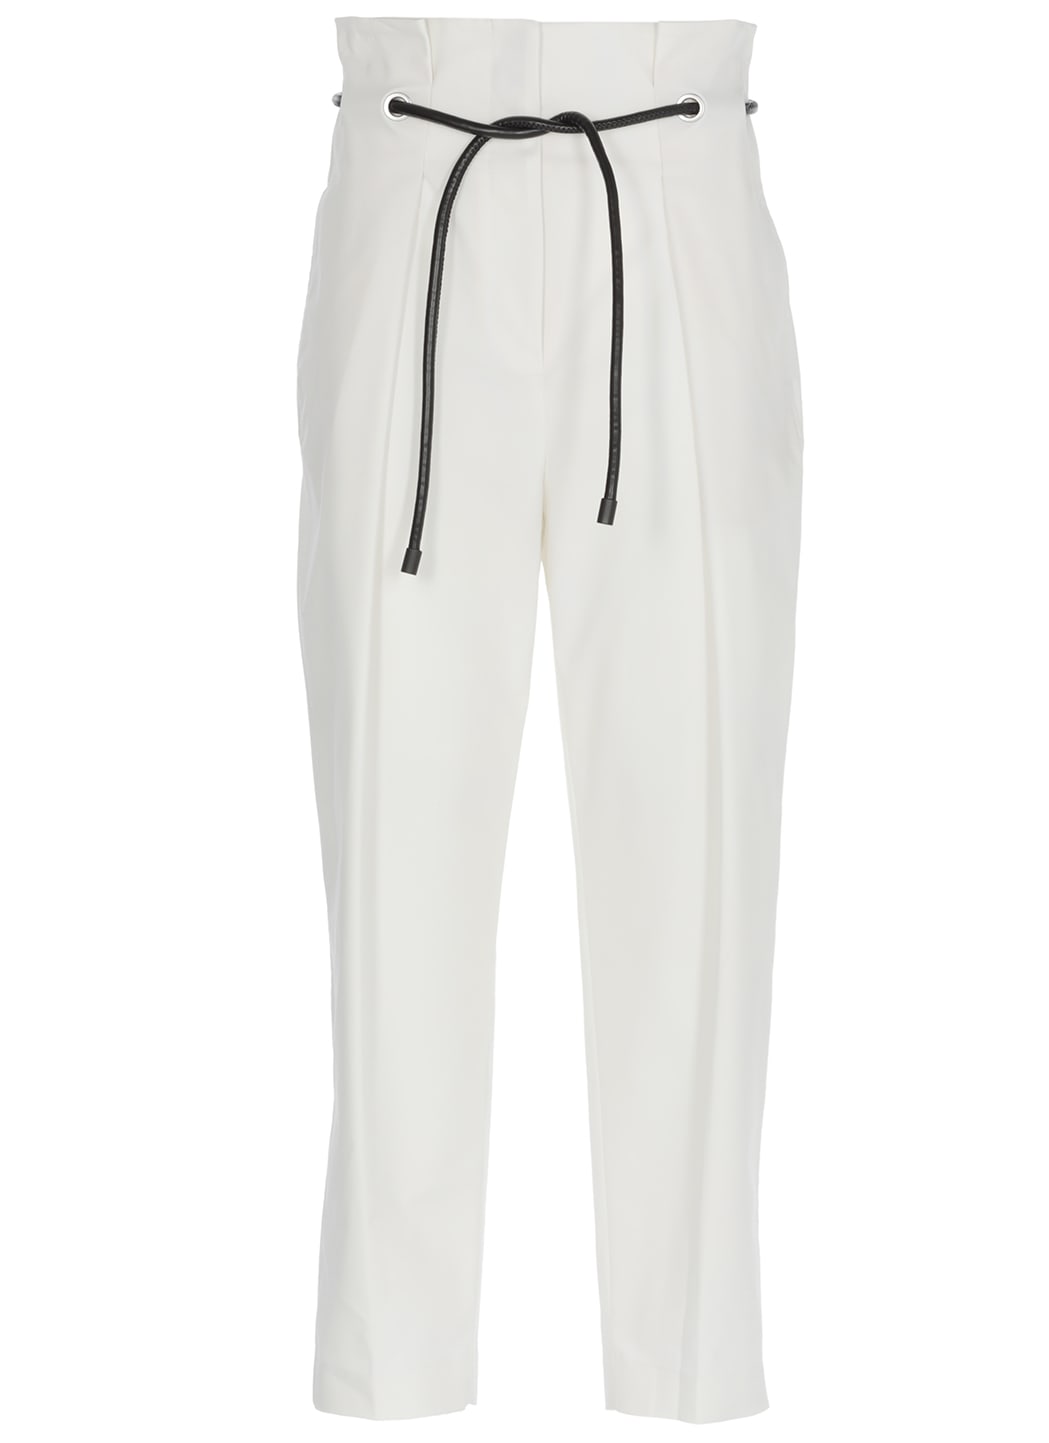 3.1 Phillip Lim Trousers With Origami Folds